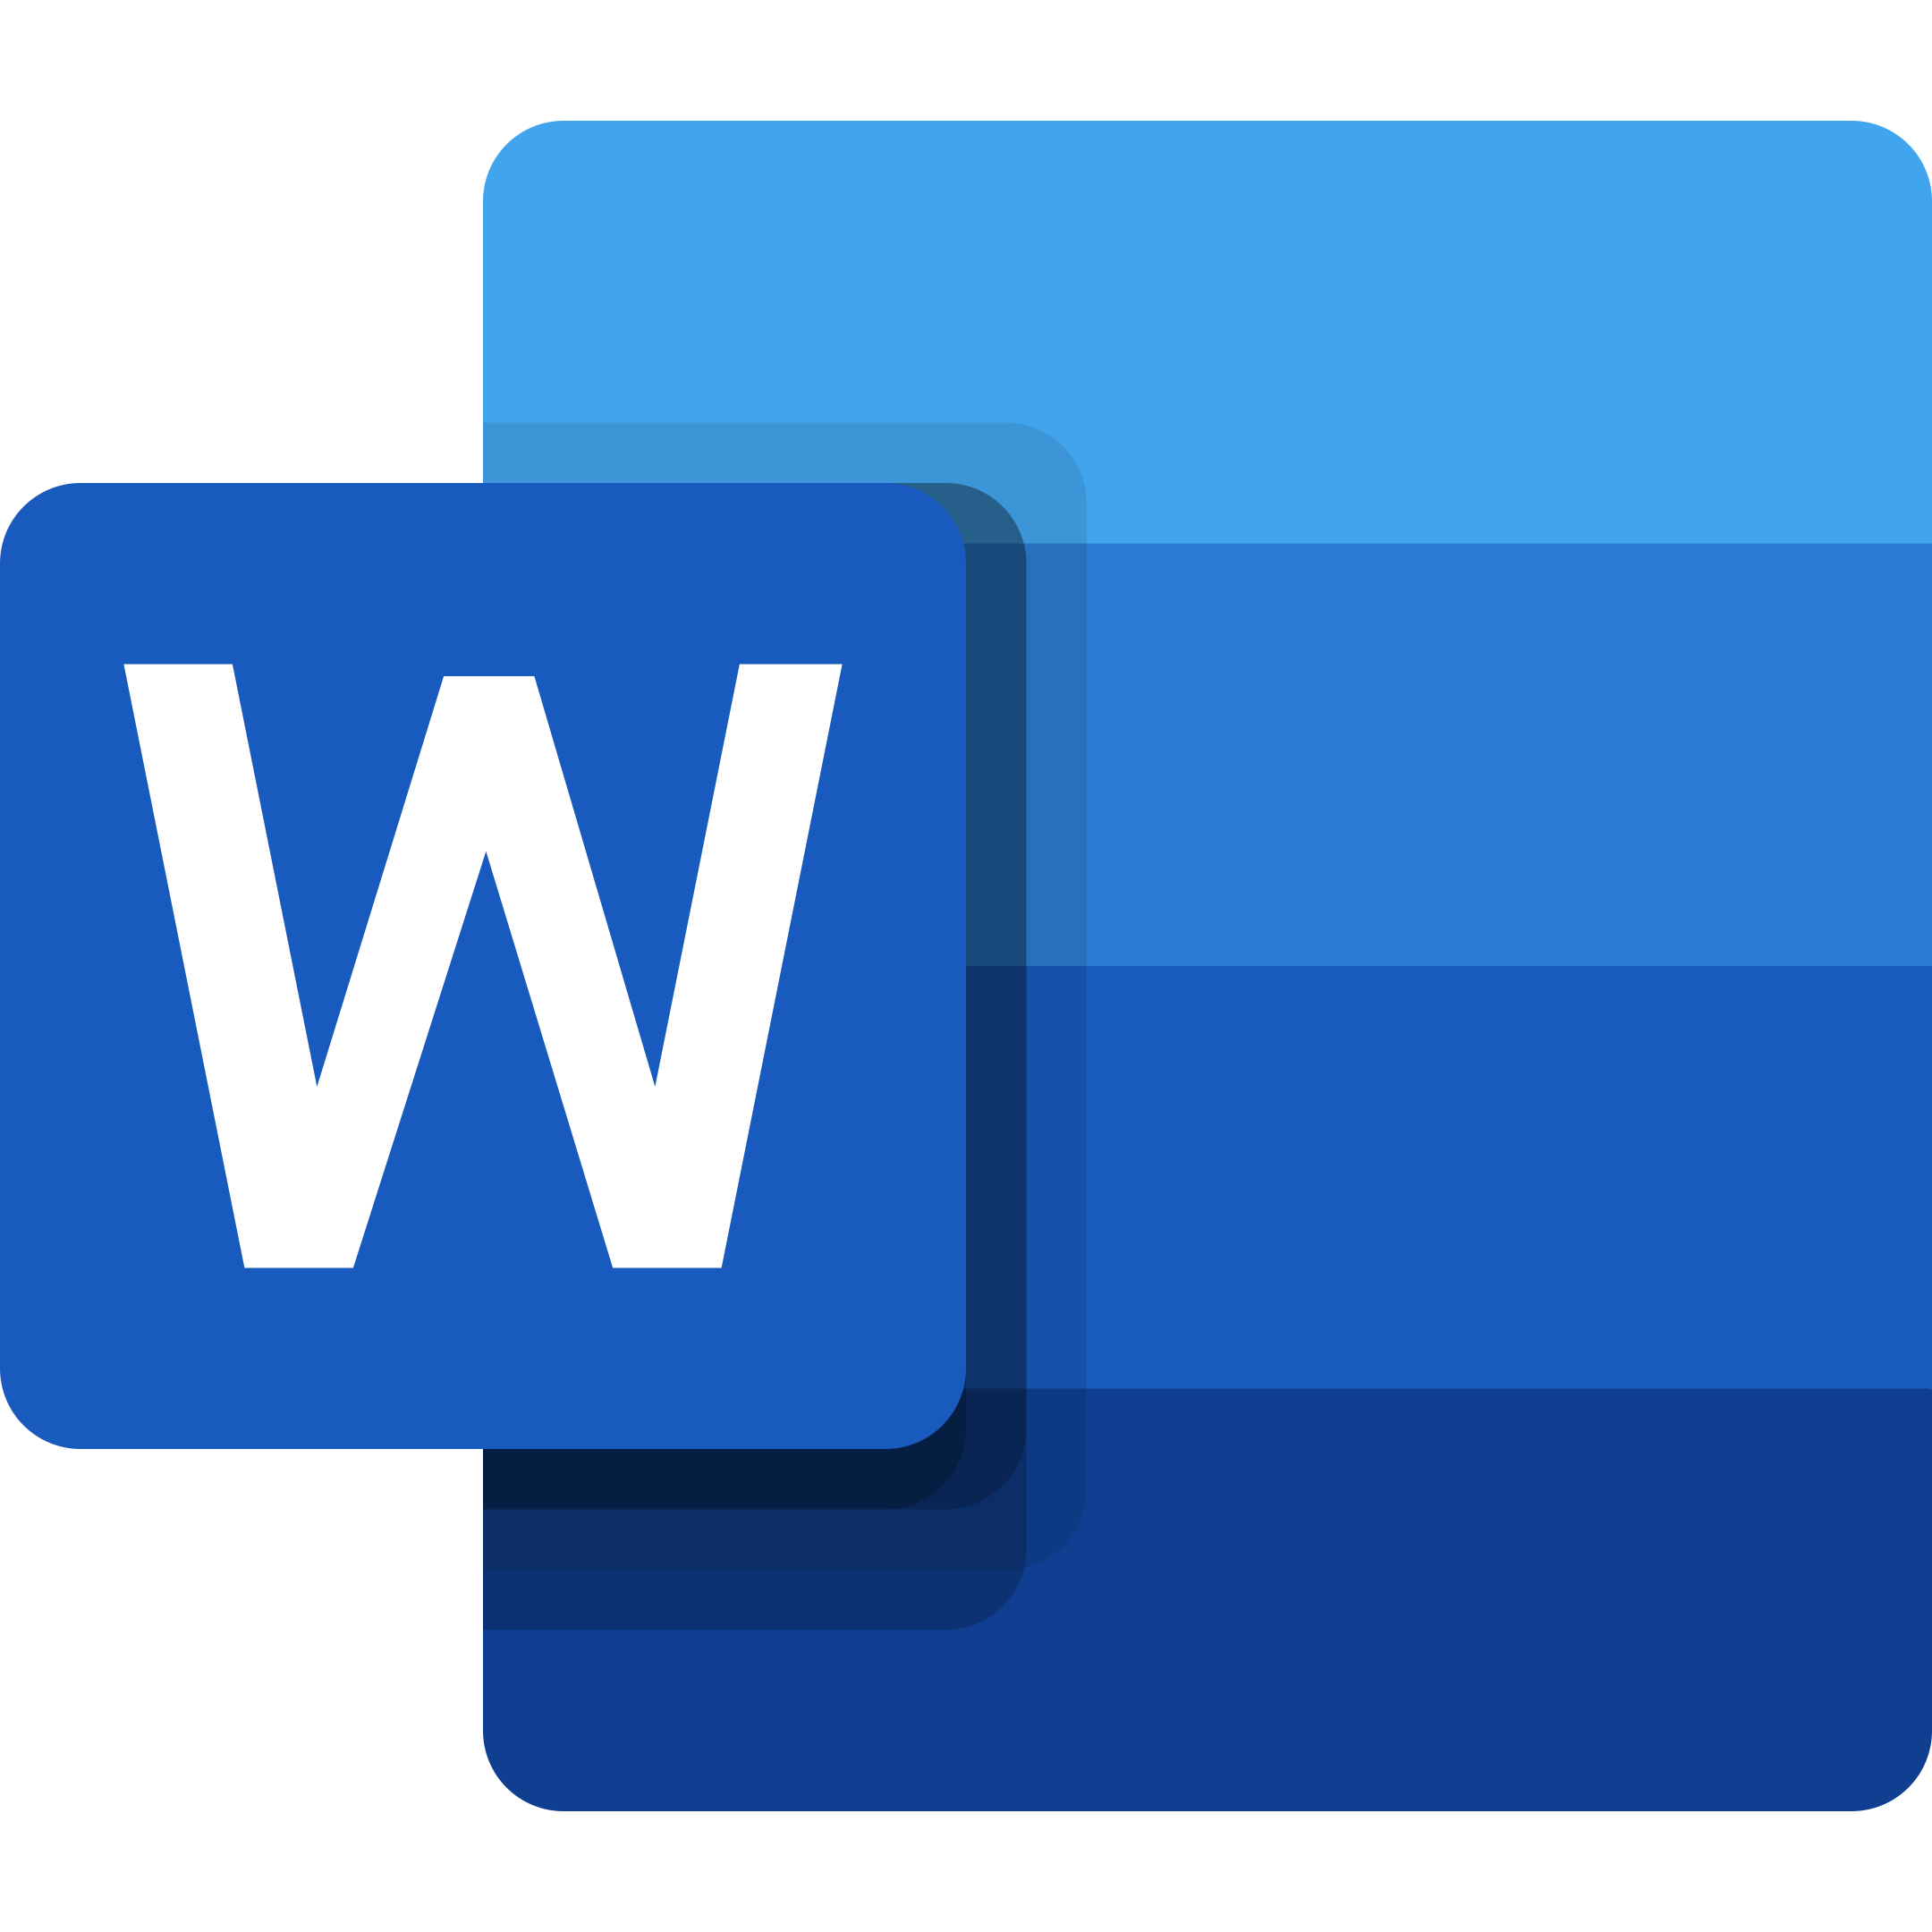 Microsoft Word logo. A blue rectangle with a white W